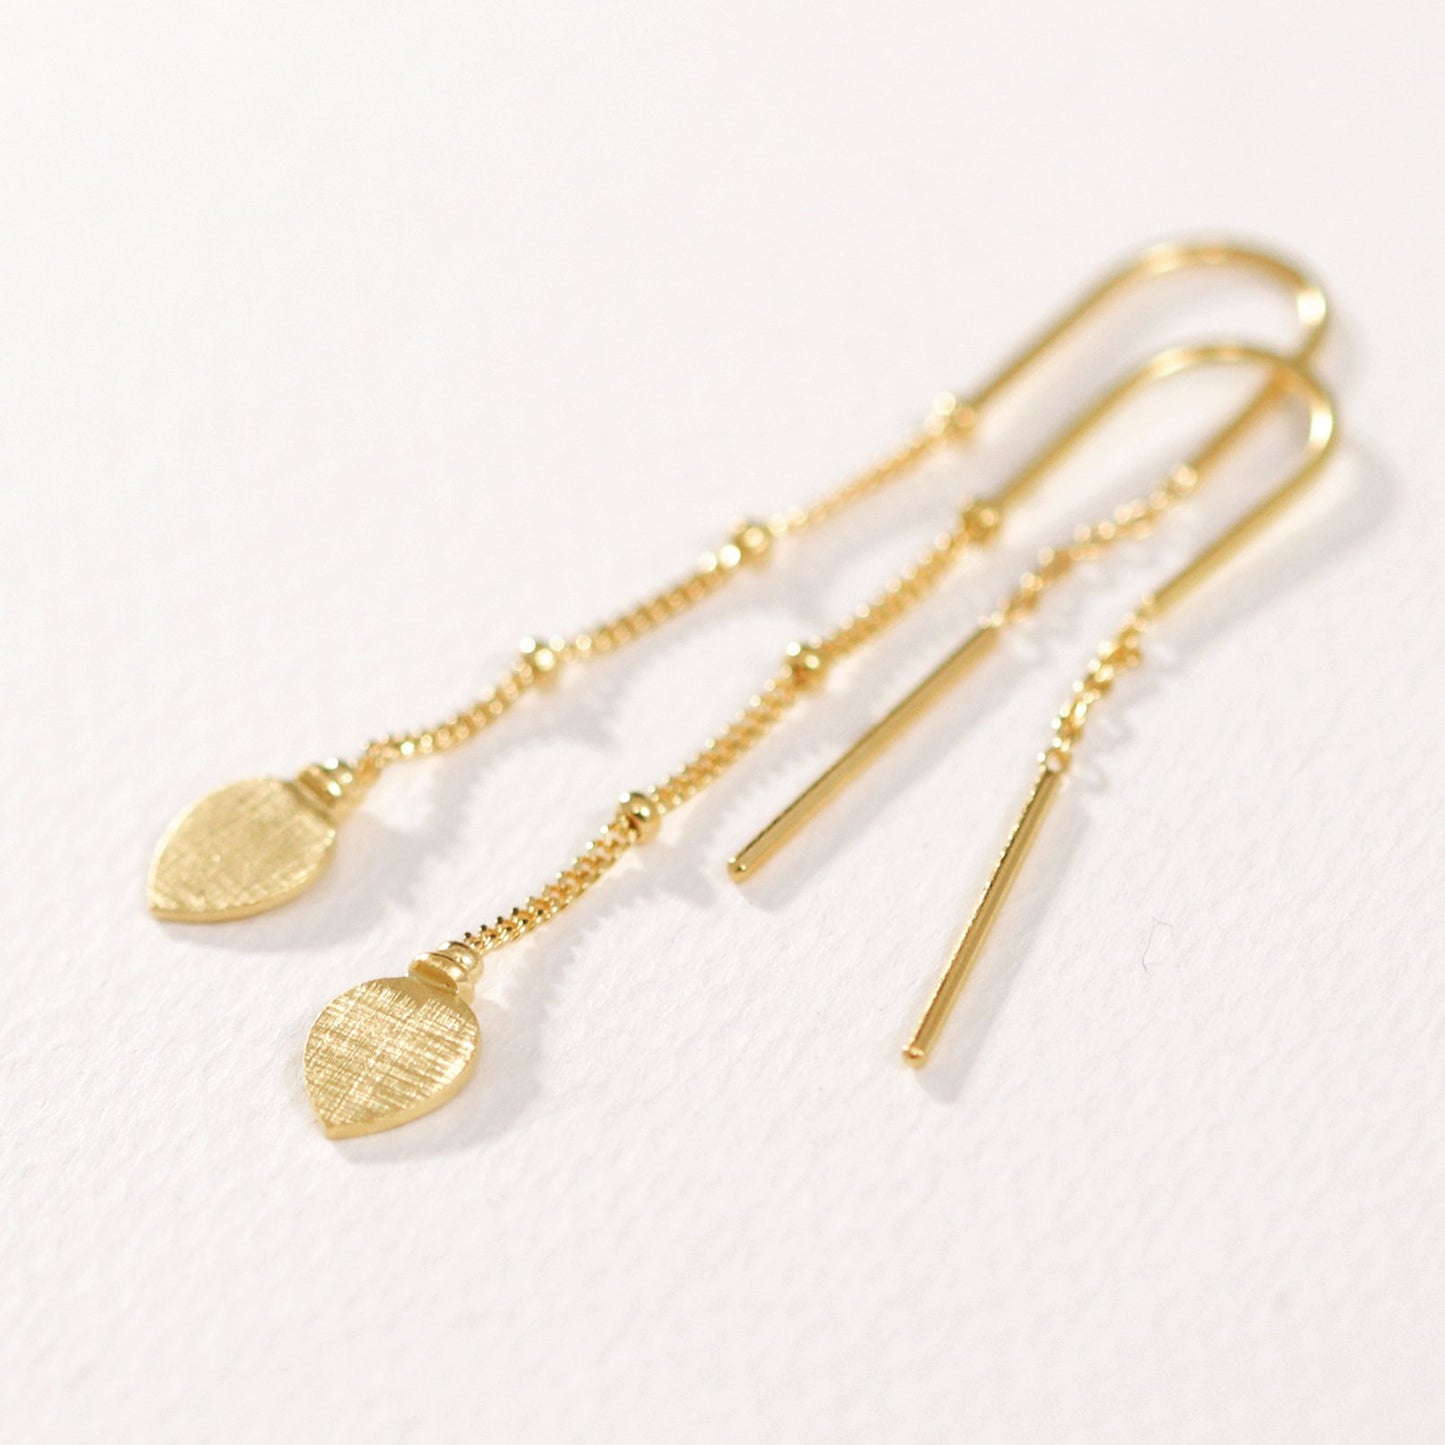 Temple of The Sun - Hanging Lotus Earrings - Gold